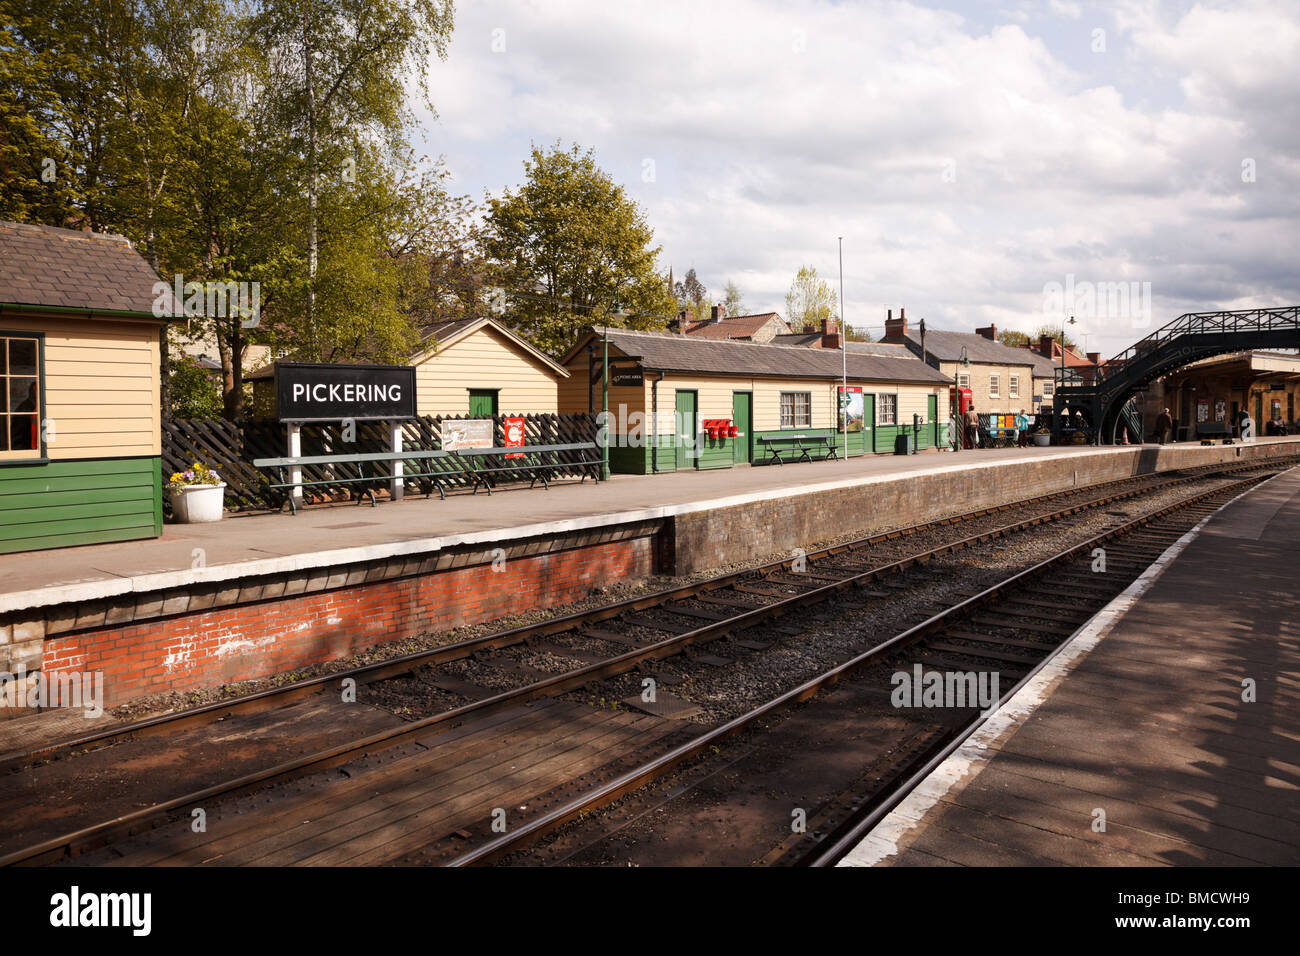 Pickering station on the North Yorkshire Moors Railway Stock Photo - Alamy